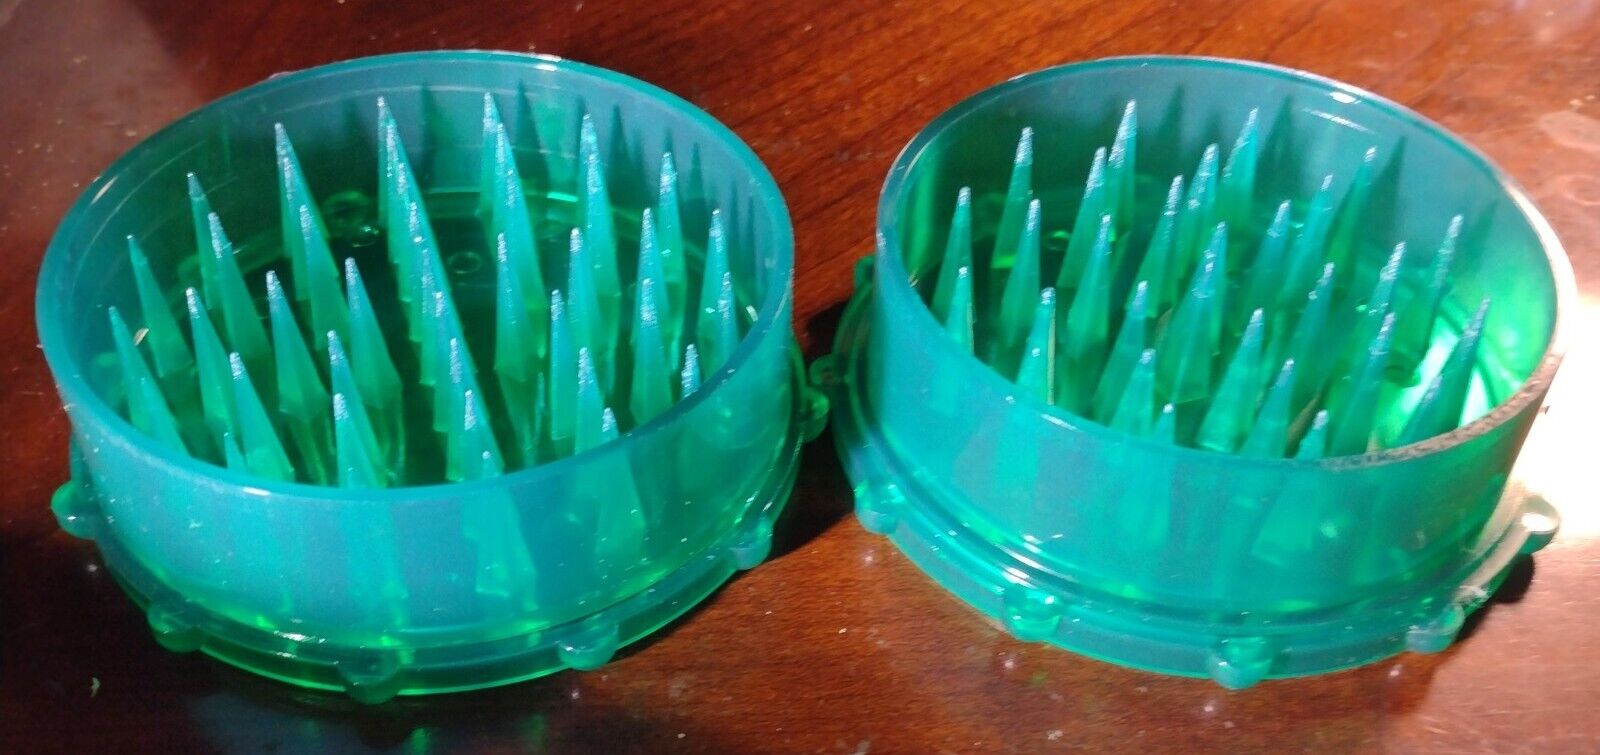 Jumbo Herb Grinder 100mm/4 inches Acrylic 2pc Green